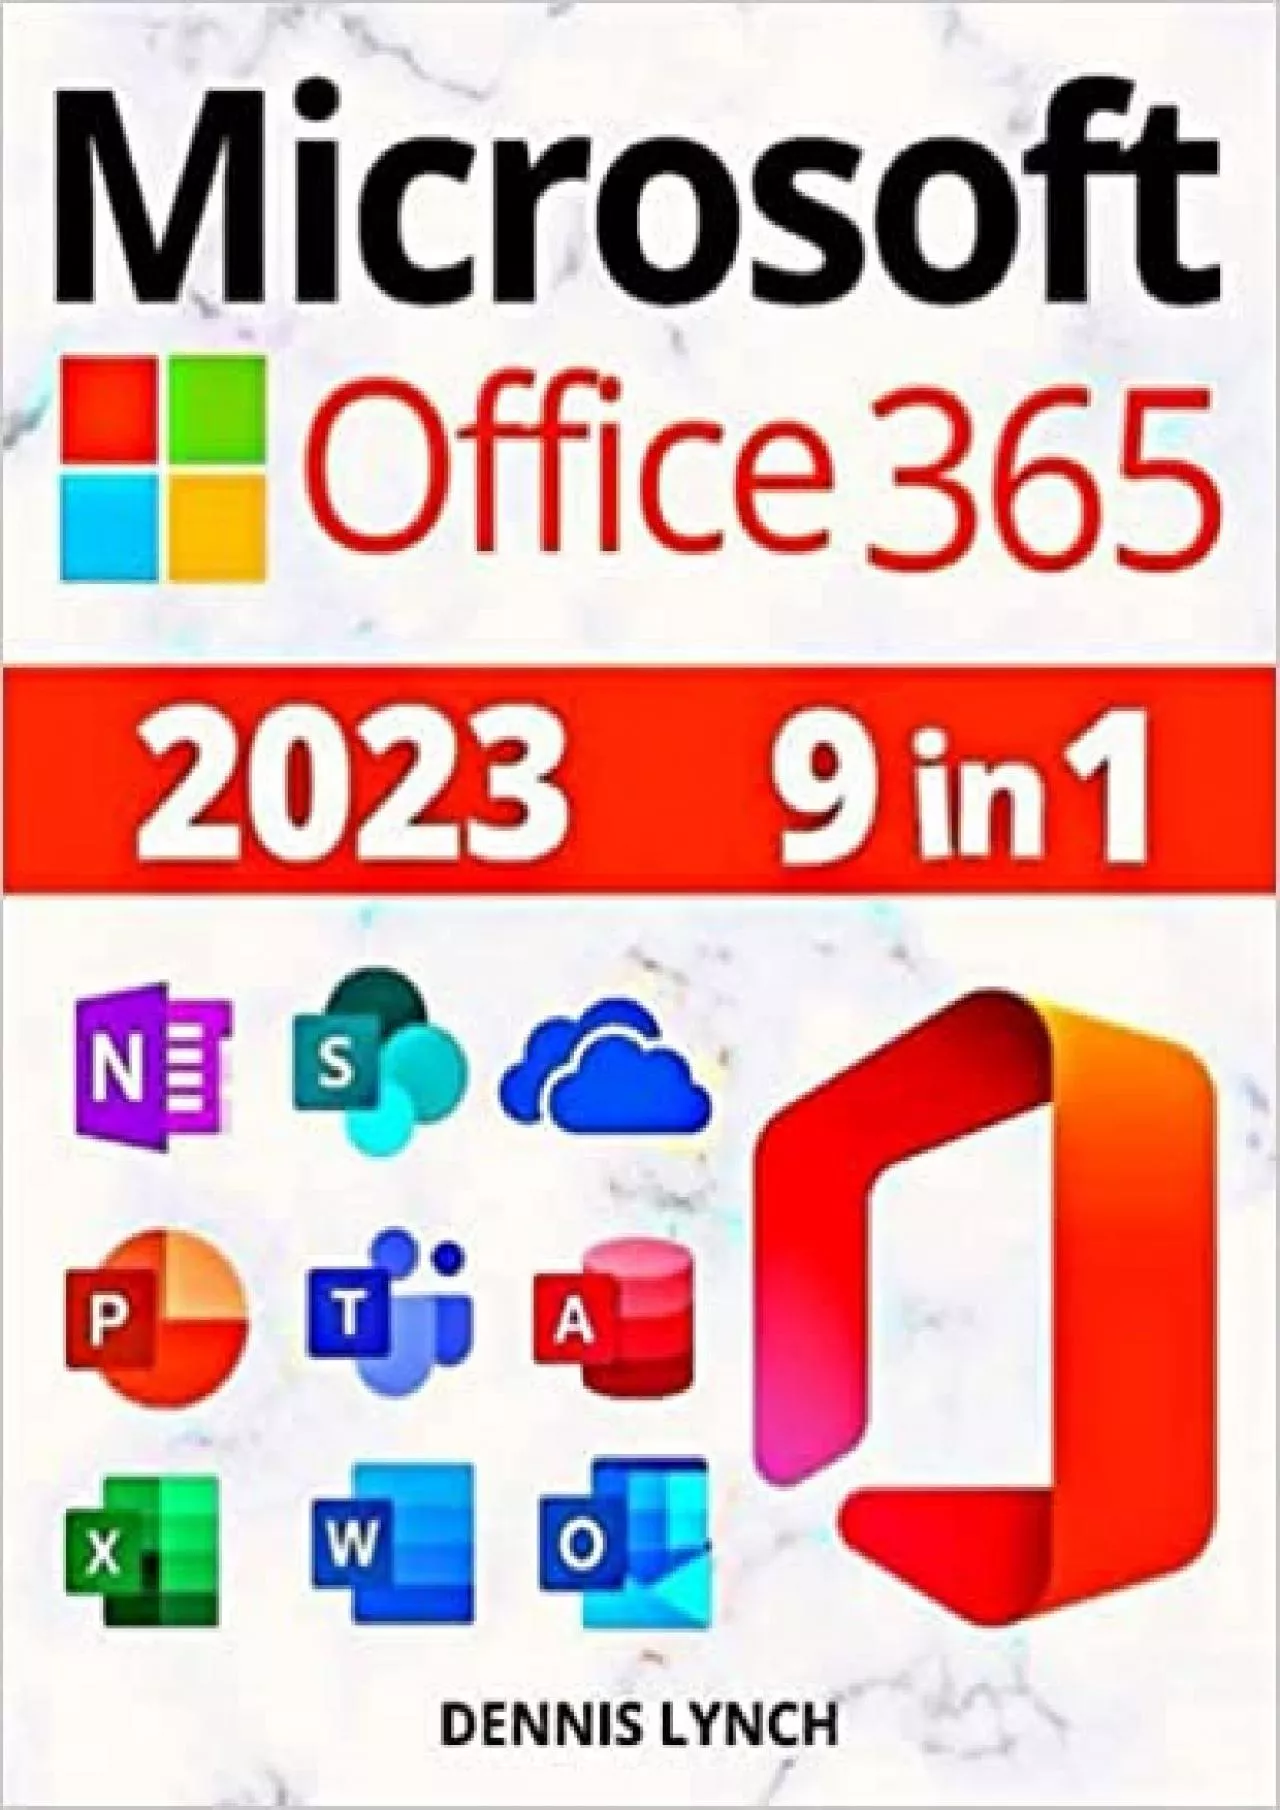 Microsoft Office 365: [9 in 1] Learn All The Tips and Tricks to Become a Pro at using